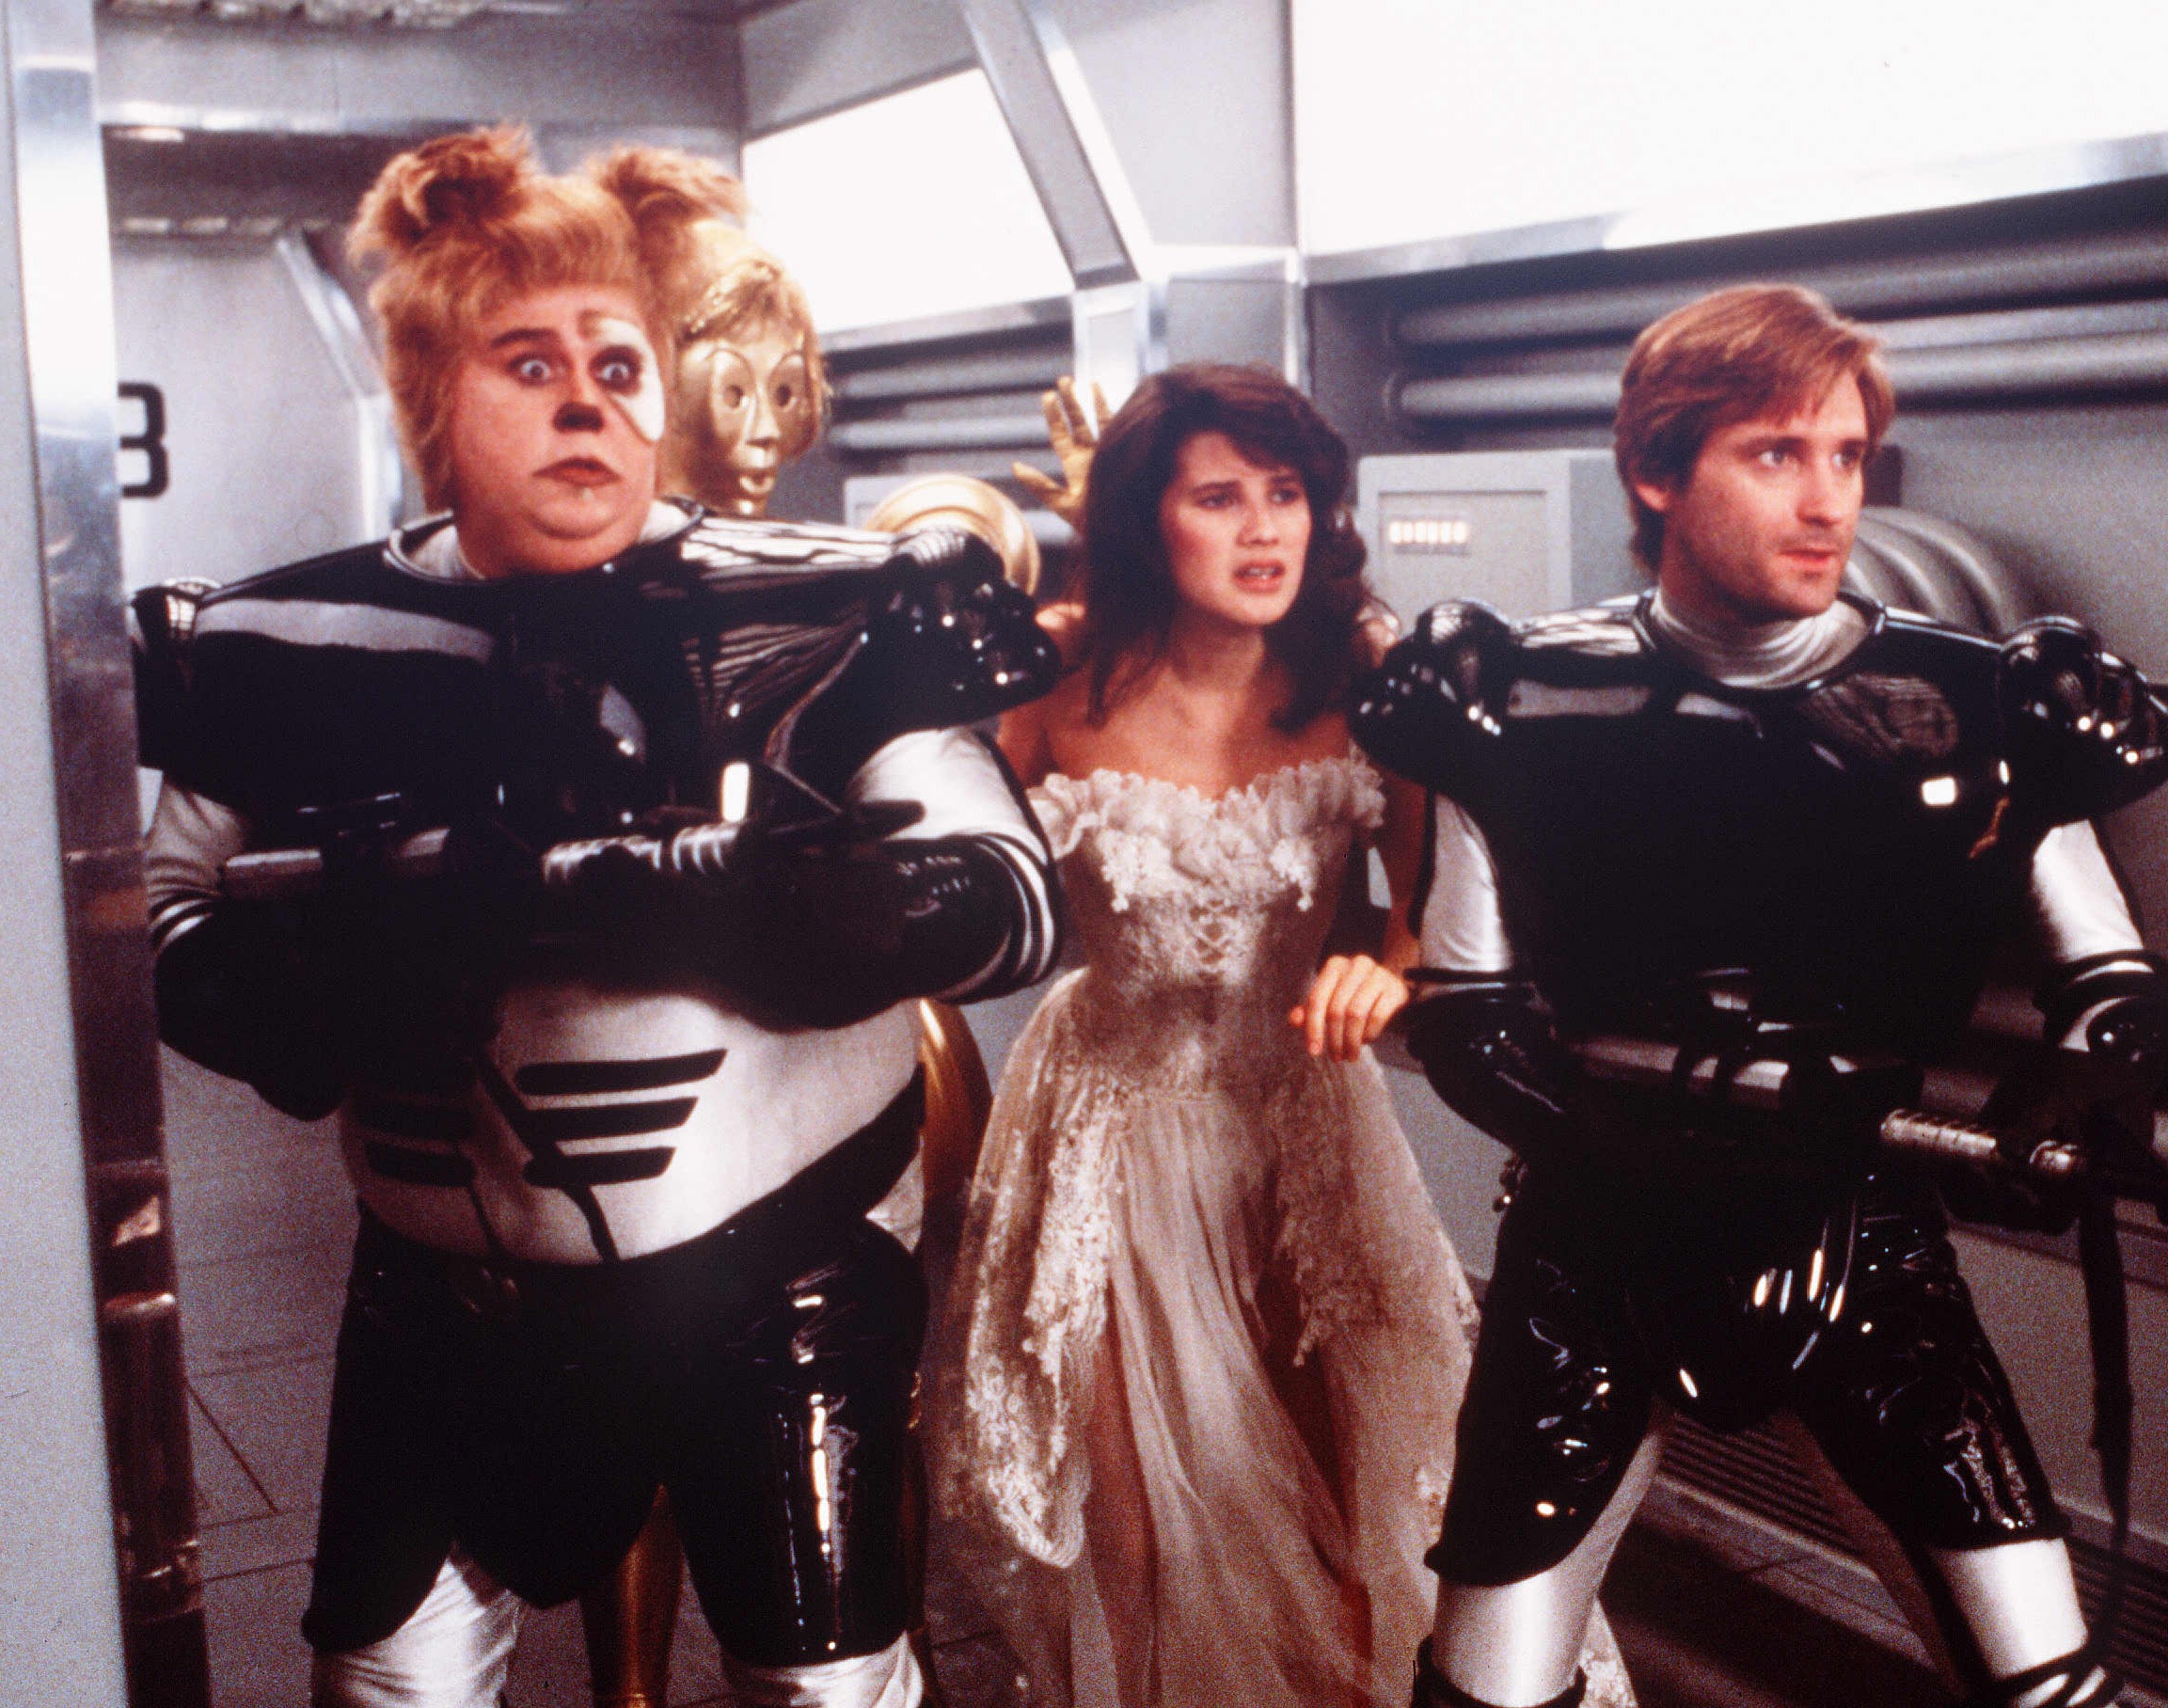 One of her most famous roles was as Princess Vesper in the space film parody, Space Balls